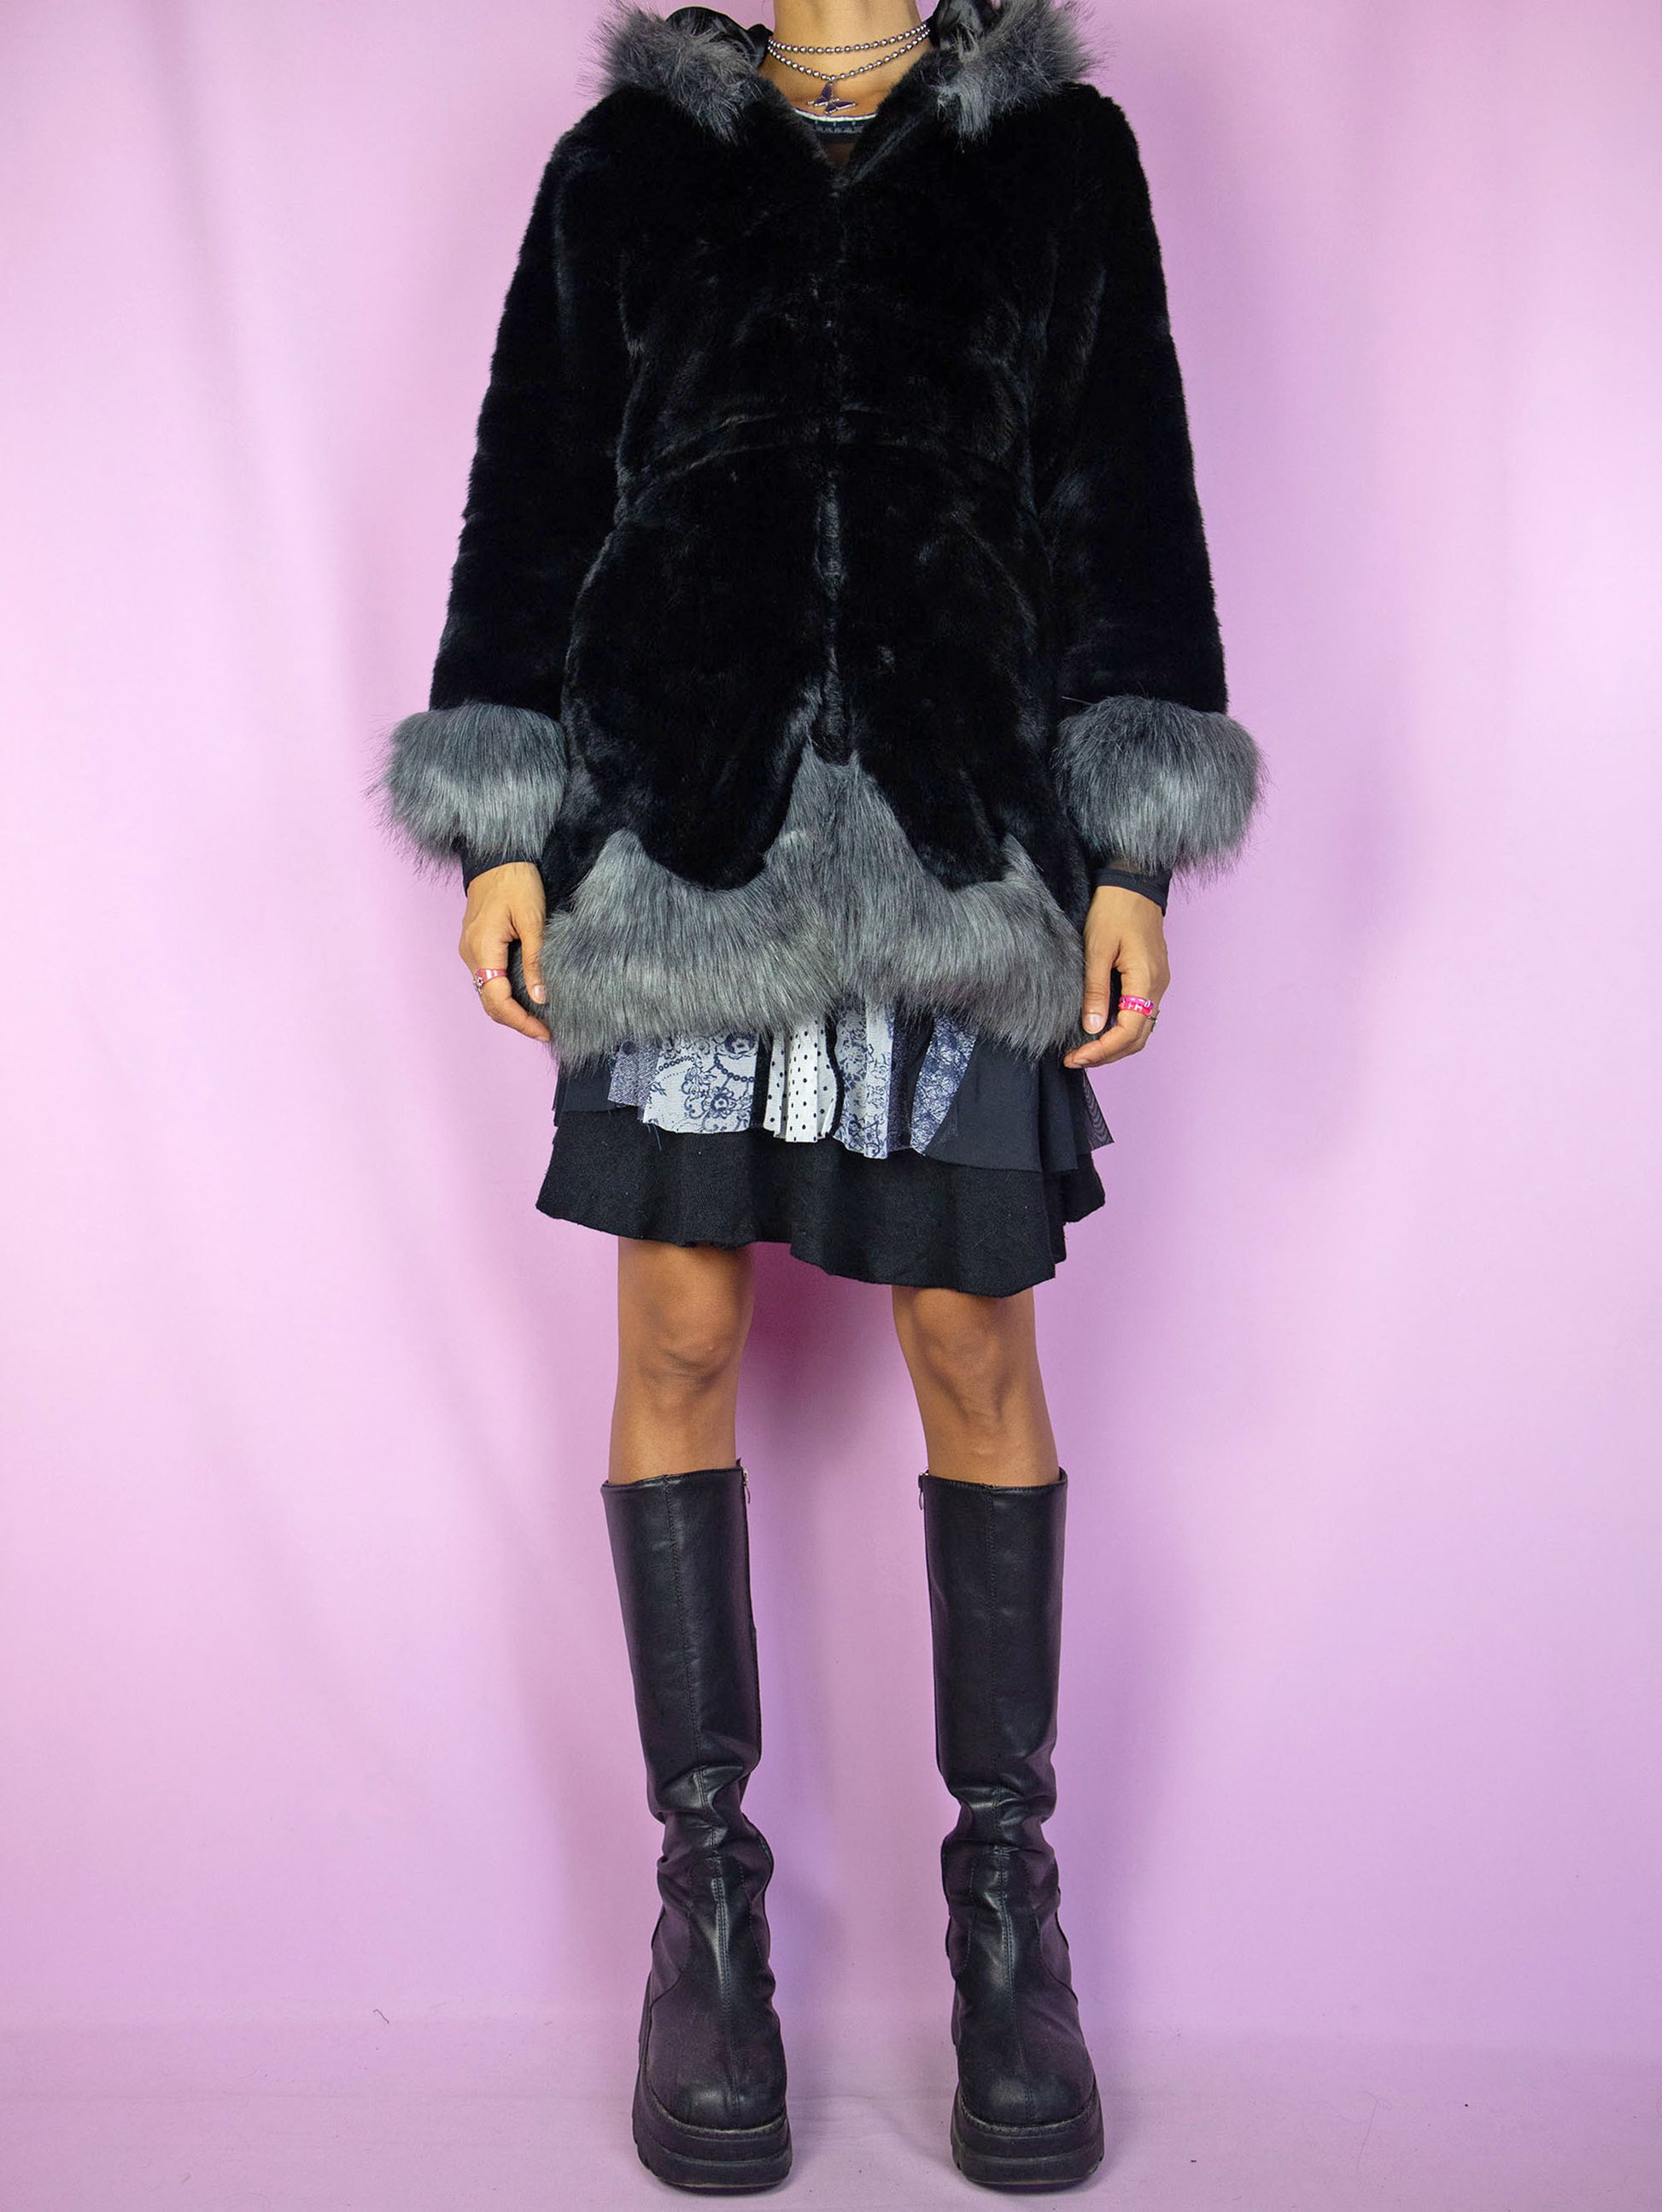 The Y2K Black Faux Fur Jacket is a vintage black faux fur jacket with gray details, a hood, pockets, and hook closure. A cute dark fairy goth winter statement coat from the 2000s.